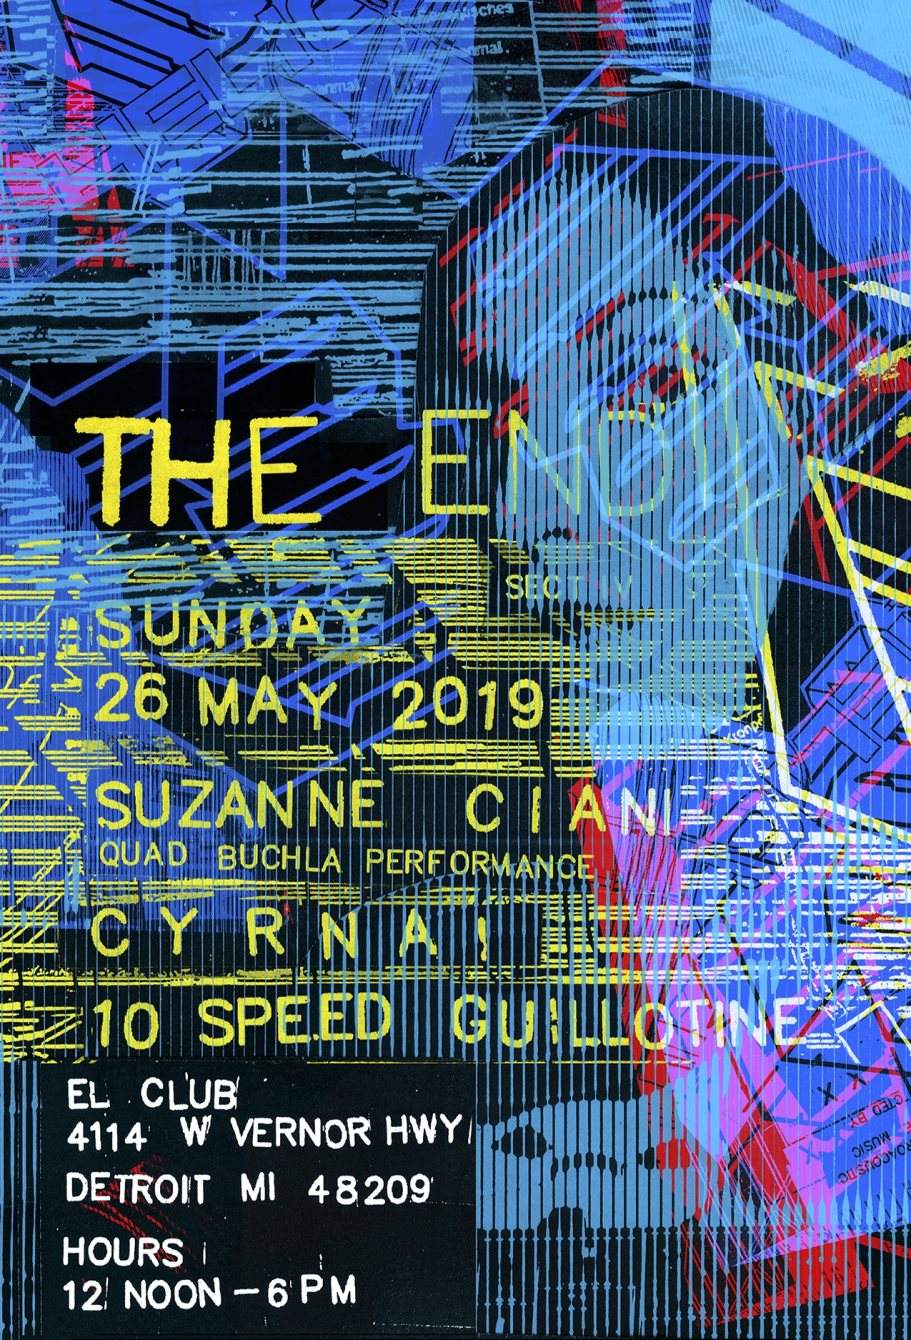 The END Sect IV: Suzanne Ciani, CYRNAI, Traxx - フライヤー表